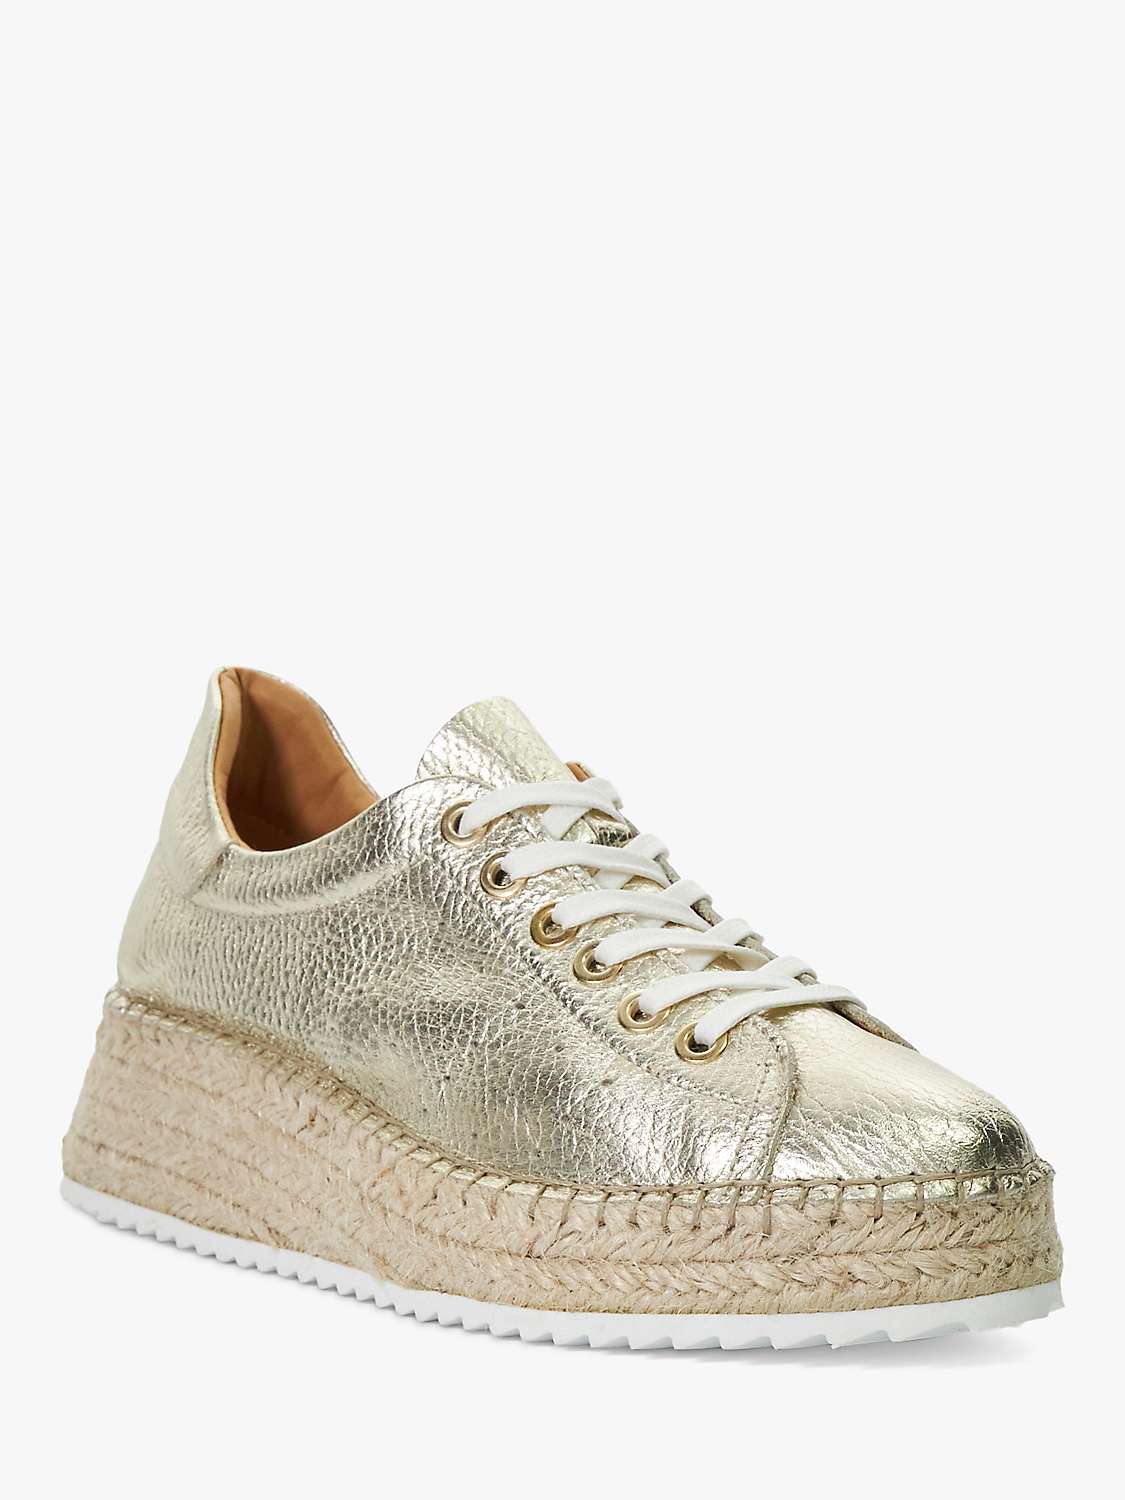 Buy Dune Explainedd Leather Lace-Up Wedge Espadrille Shoes Online at johnlewis.com